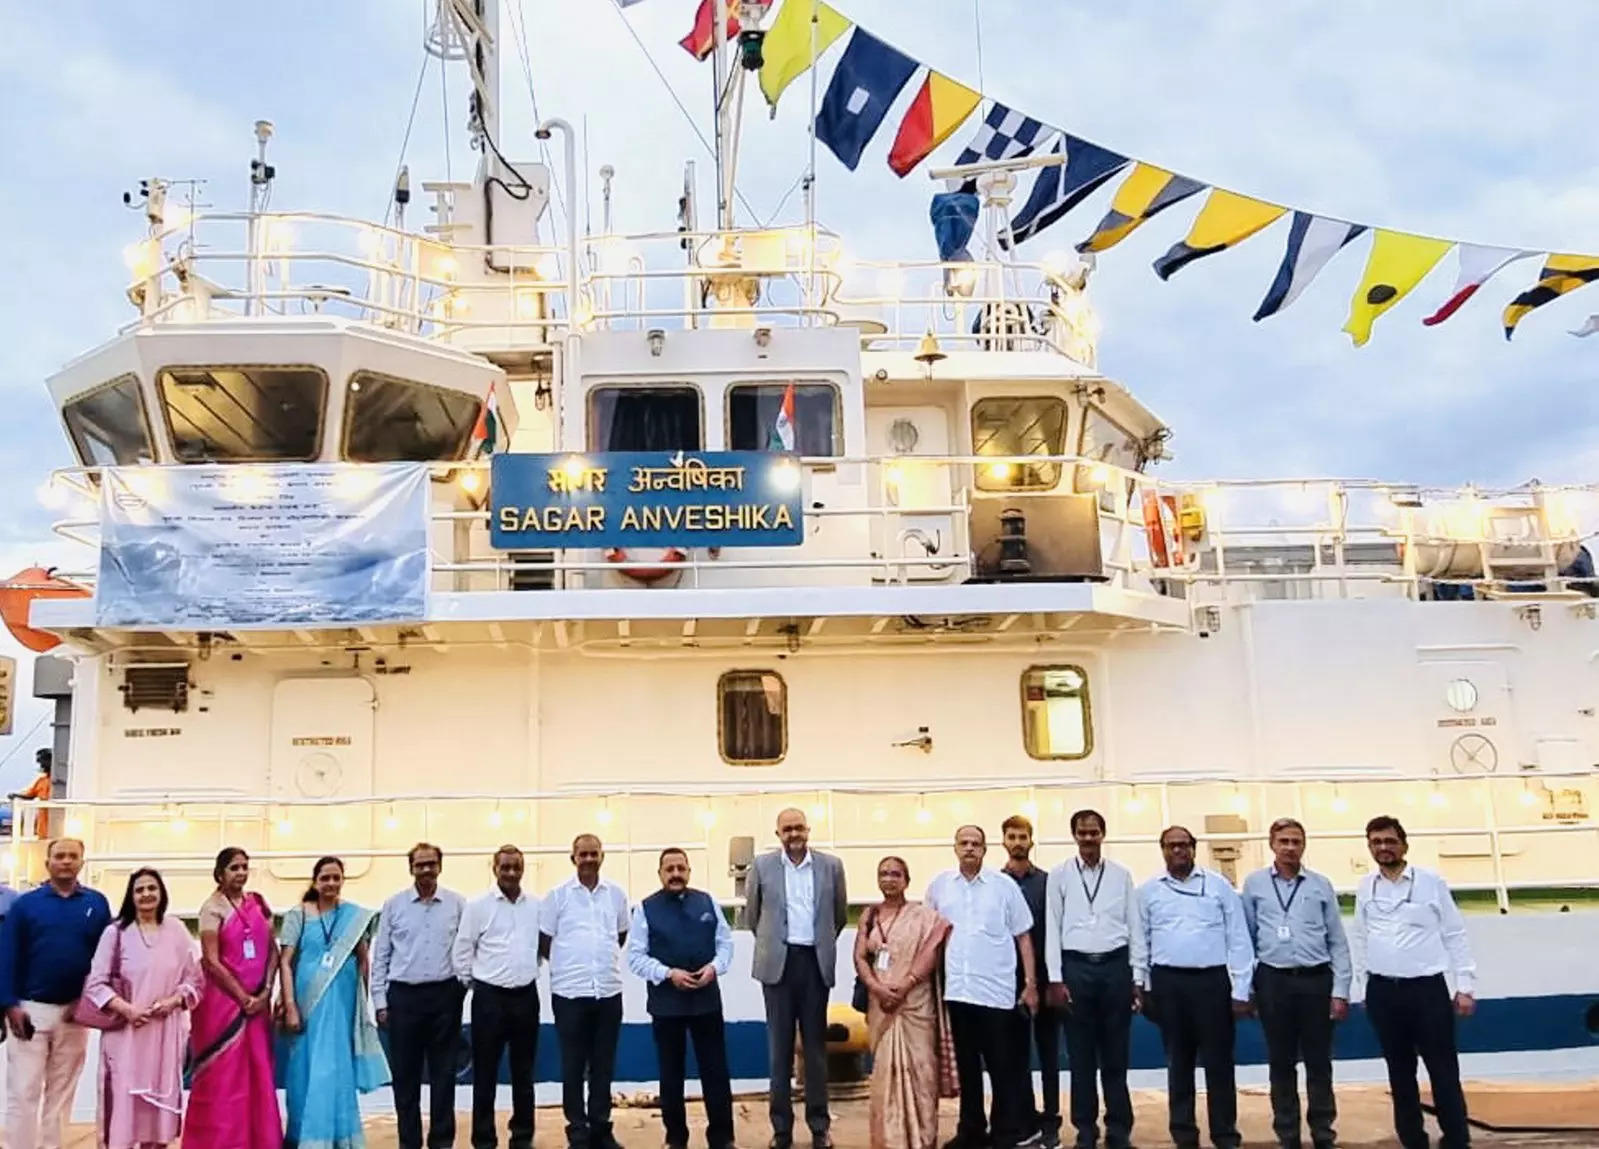  Union MoS for Science & Technology and Earth Sciences (I/C) Jitendra Singh at the launch of a lantern named 'Roshini' at 'Sagar Anveshika', a Coastal Research Vessel, under NIOT Chennai. PTI Photo.